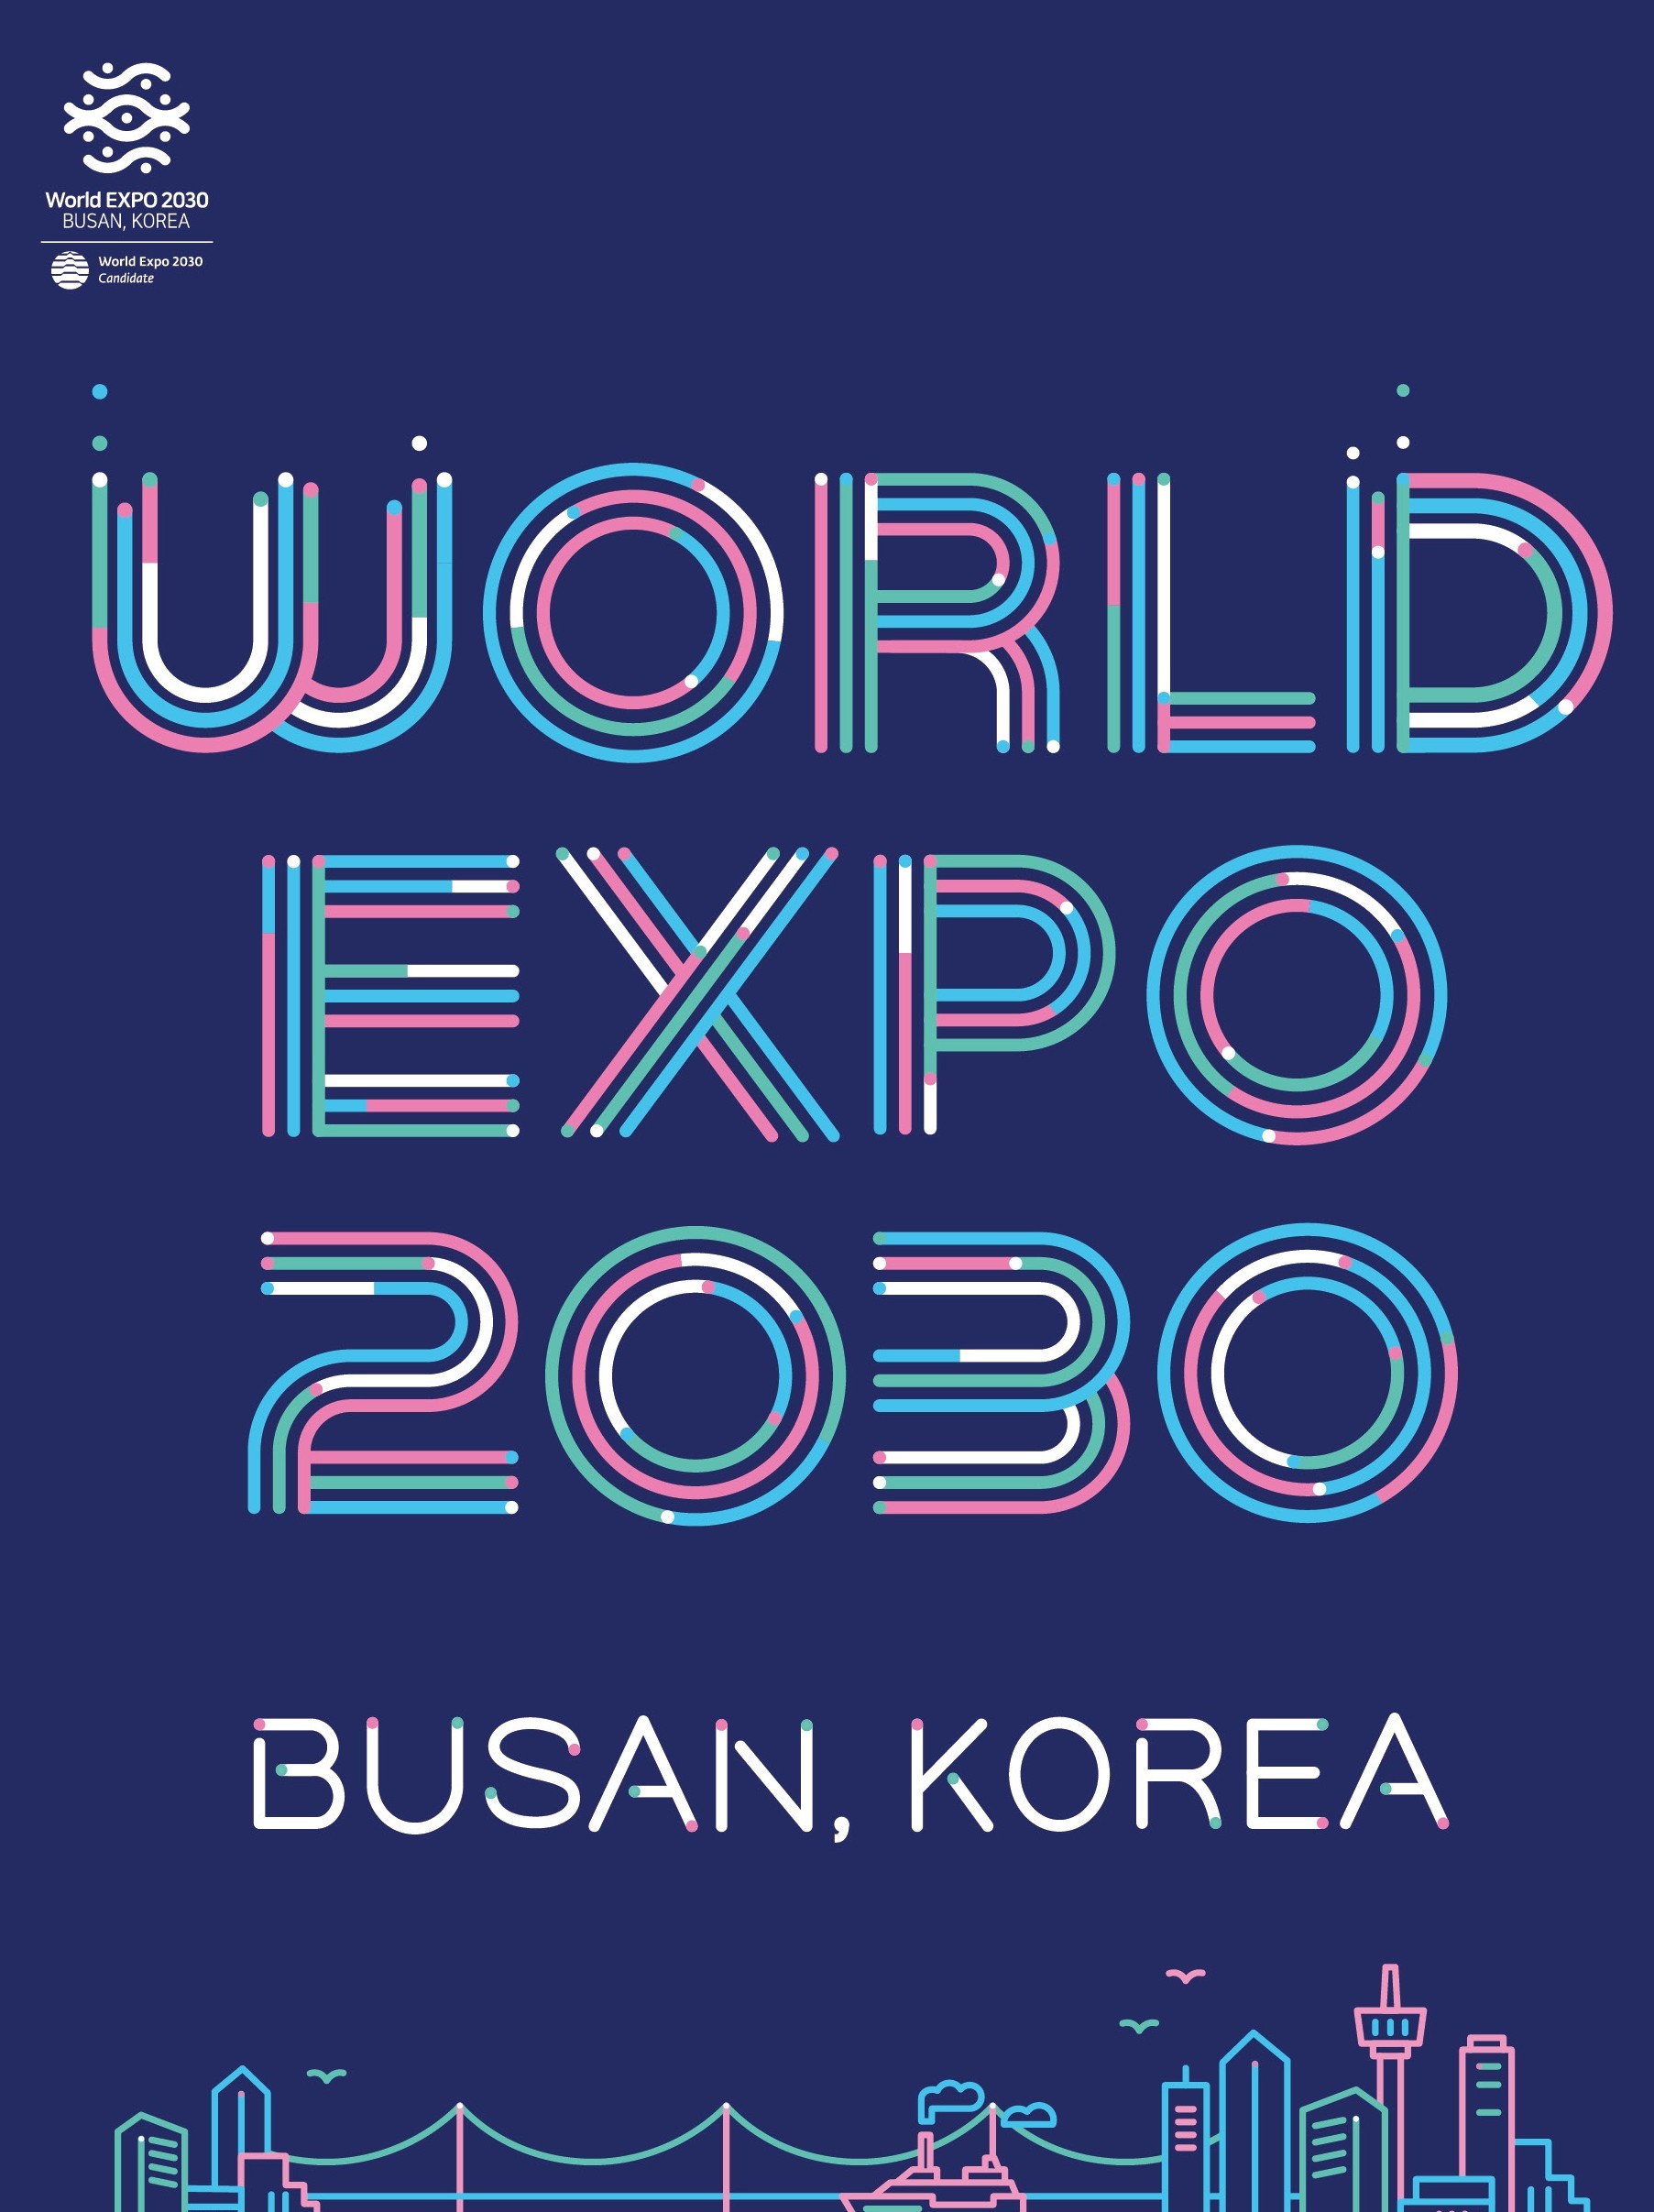 Busan: The Optimum Host for the World EXPO 2030